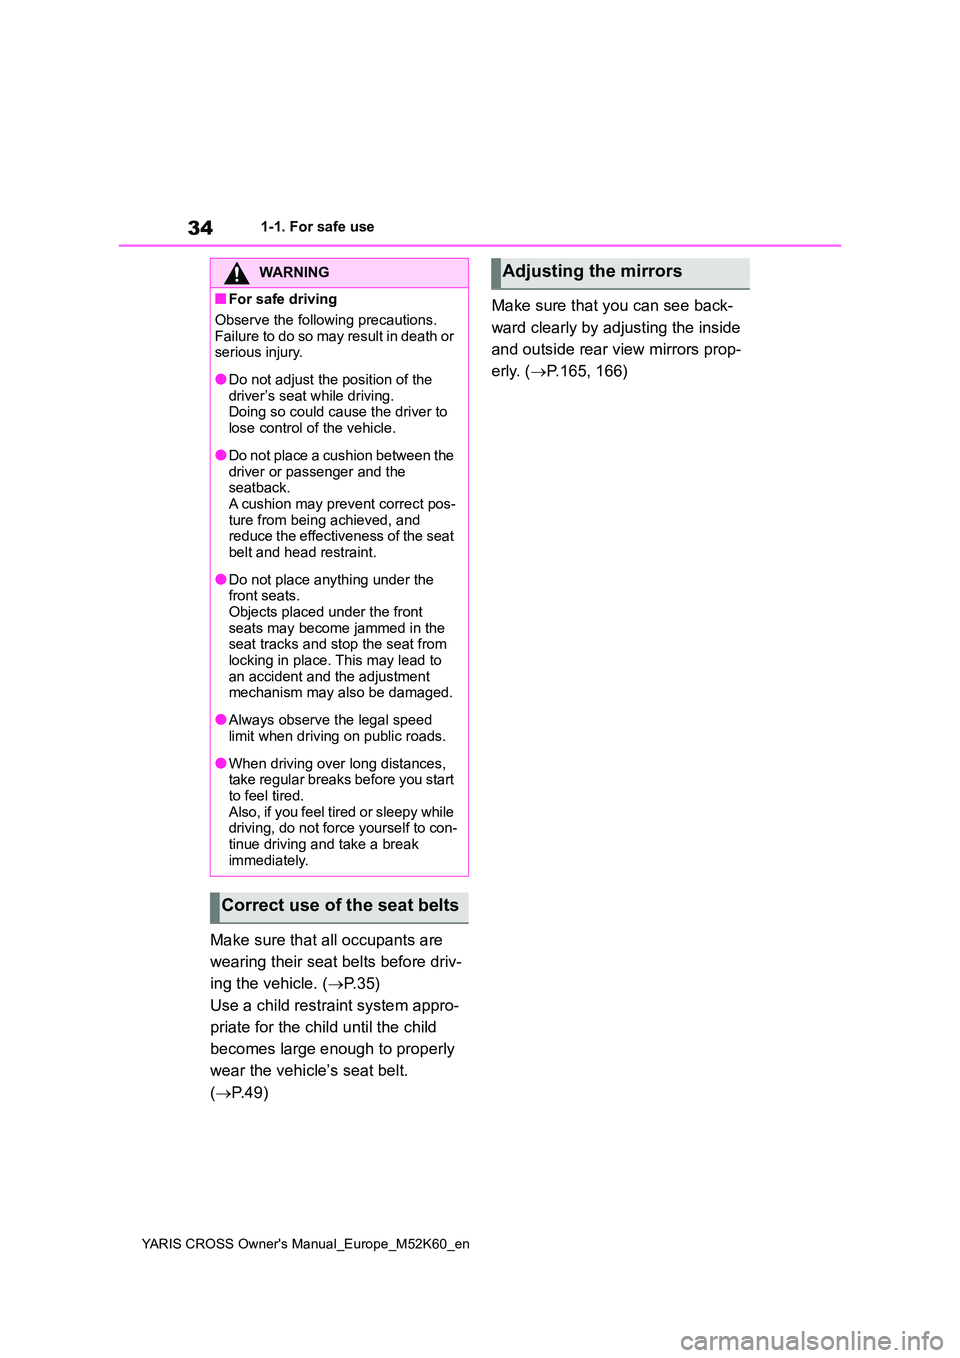 TOYOTA YARIS CROSS 2021  Owners Manual 34
YARIS CROSS Owner's Manual_Europe_M52K60_en
1-1. For safe use
Make sure that all occupants are  
wearing their seat belts before driv- 
ing the vehicle. ( P.35) 
Use a child restraint system